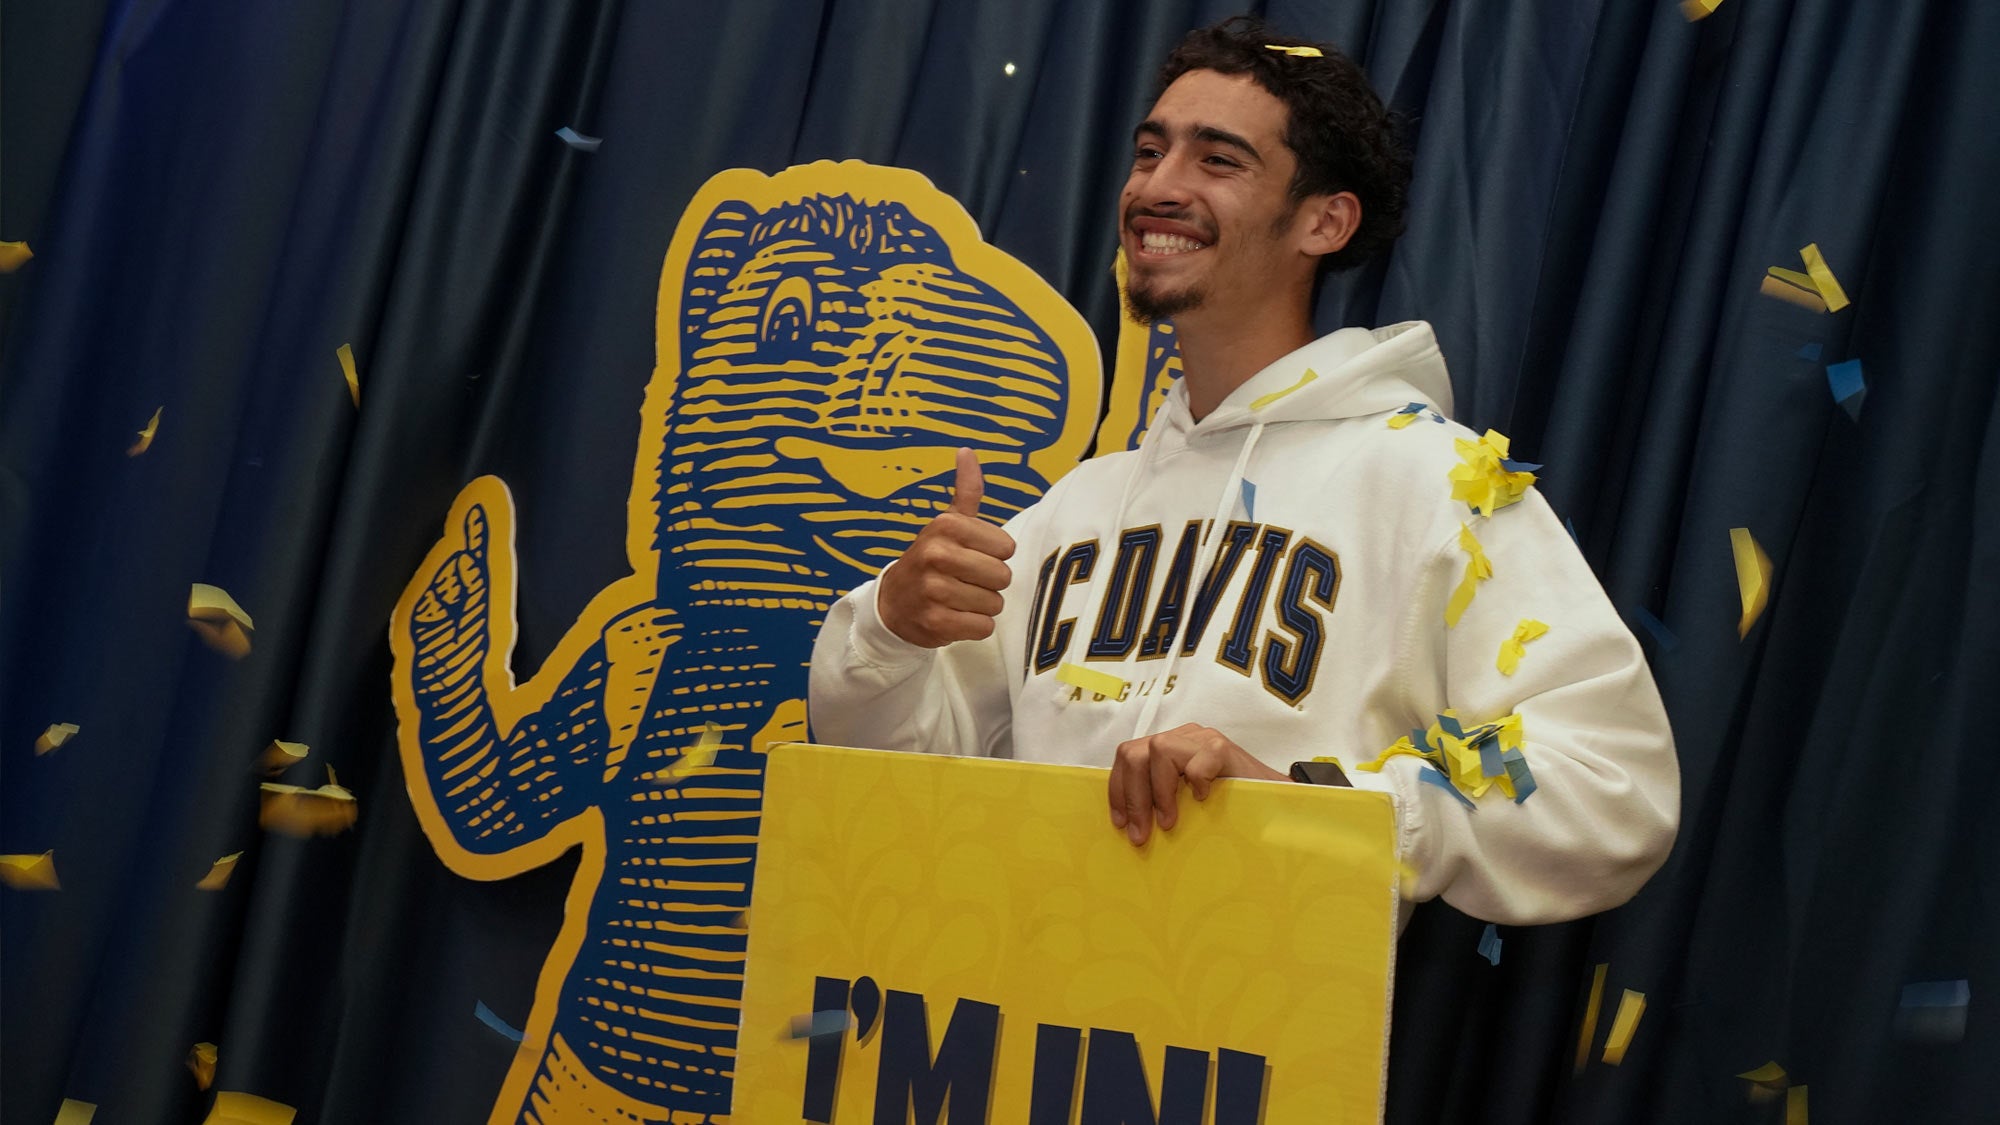 New UC Davis student Gabriel Hernandez from Modesto, California, poses with a cutout of Gunrock during Aggie Day 2023. (Karin Higgins/UC Davis)